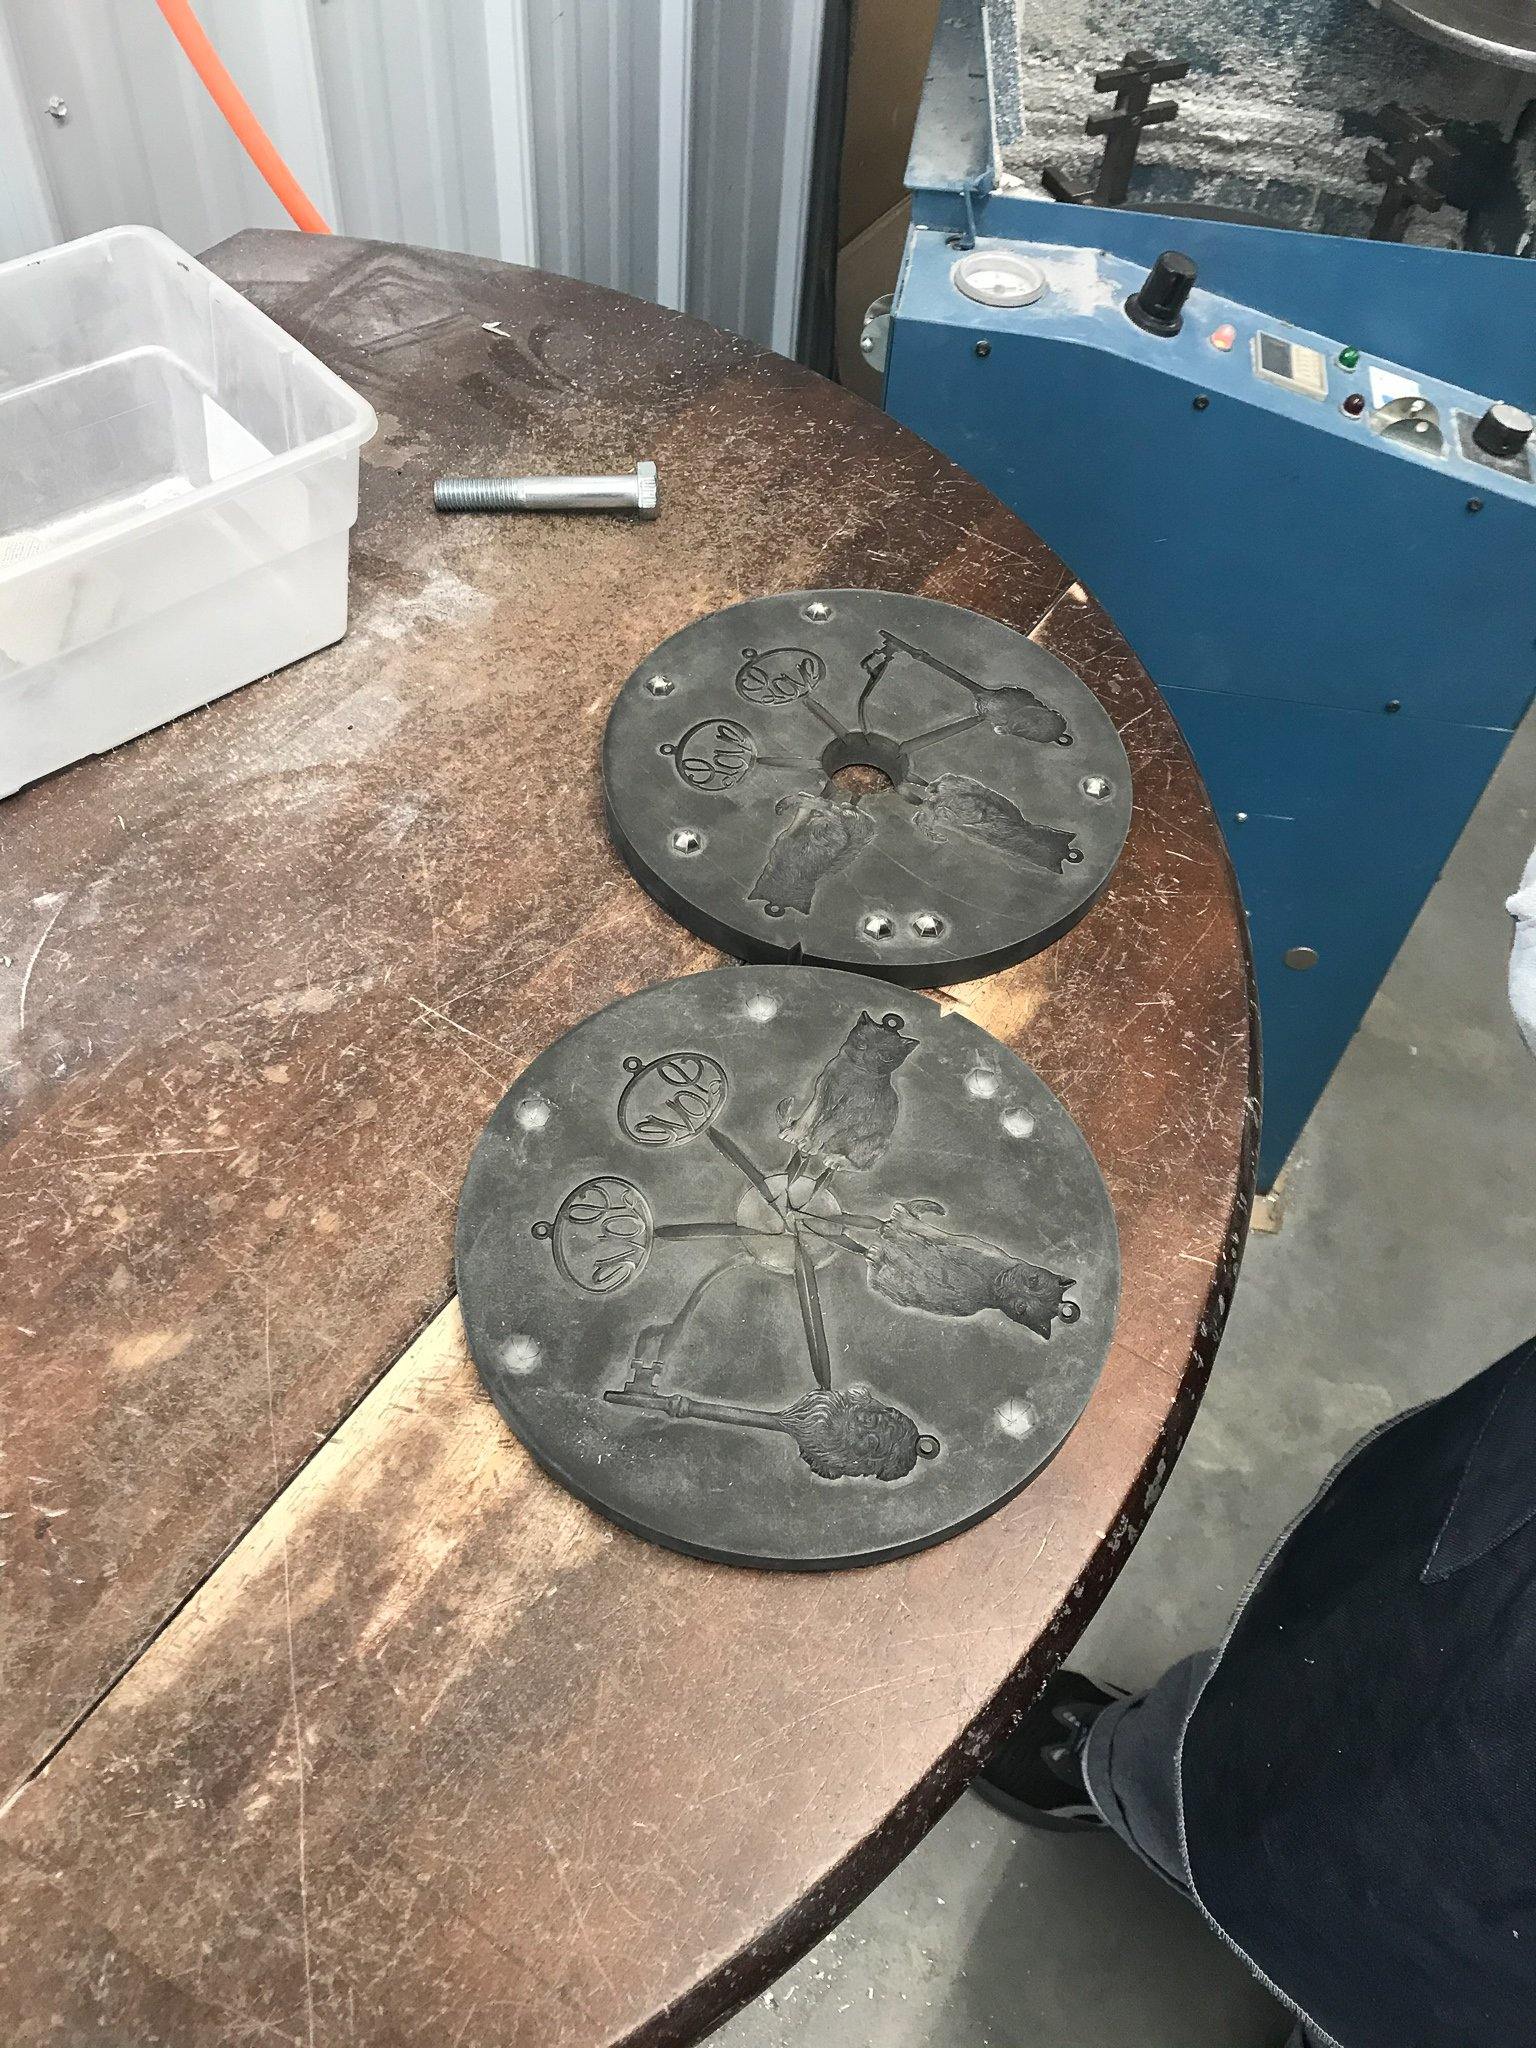 american company using traditional pewter molds